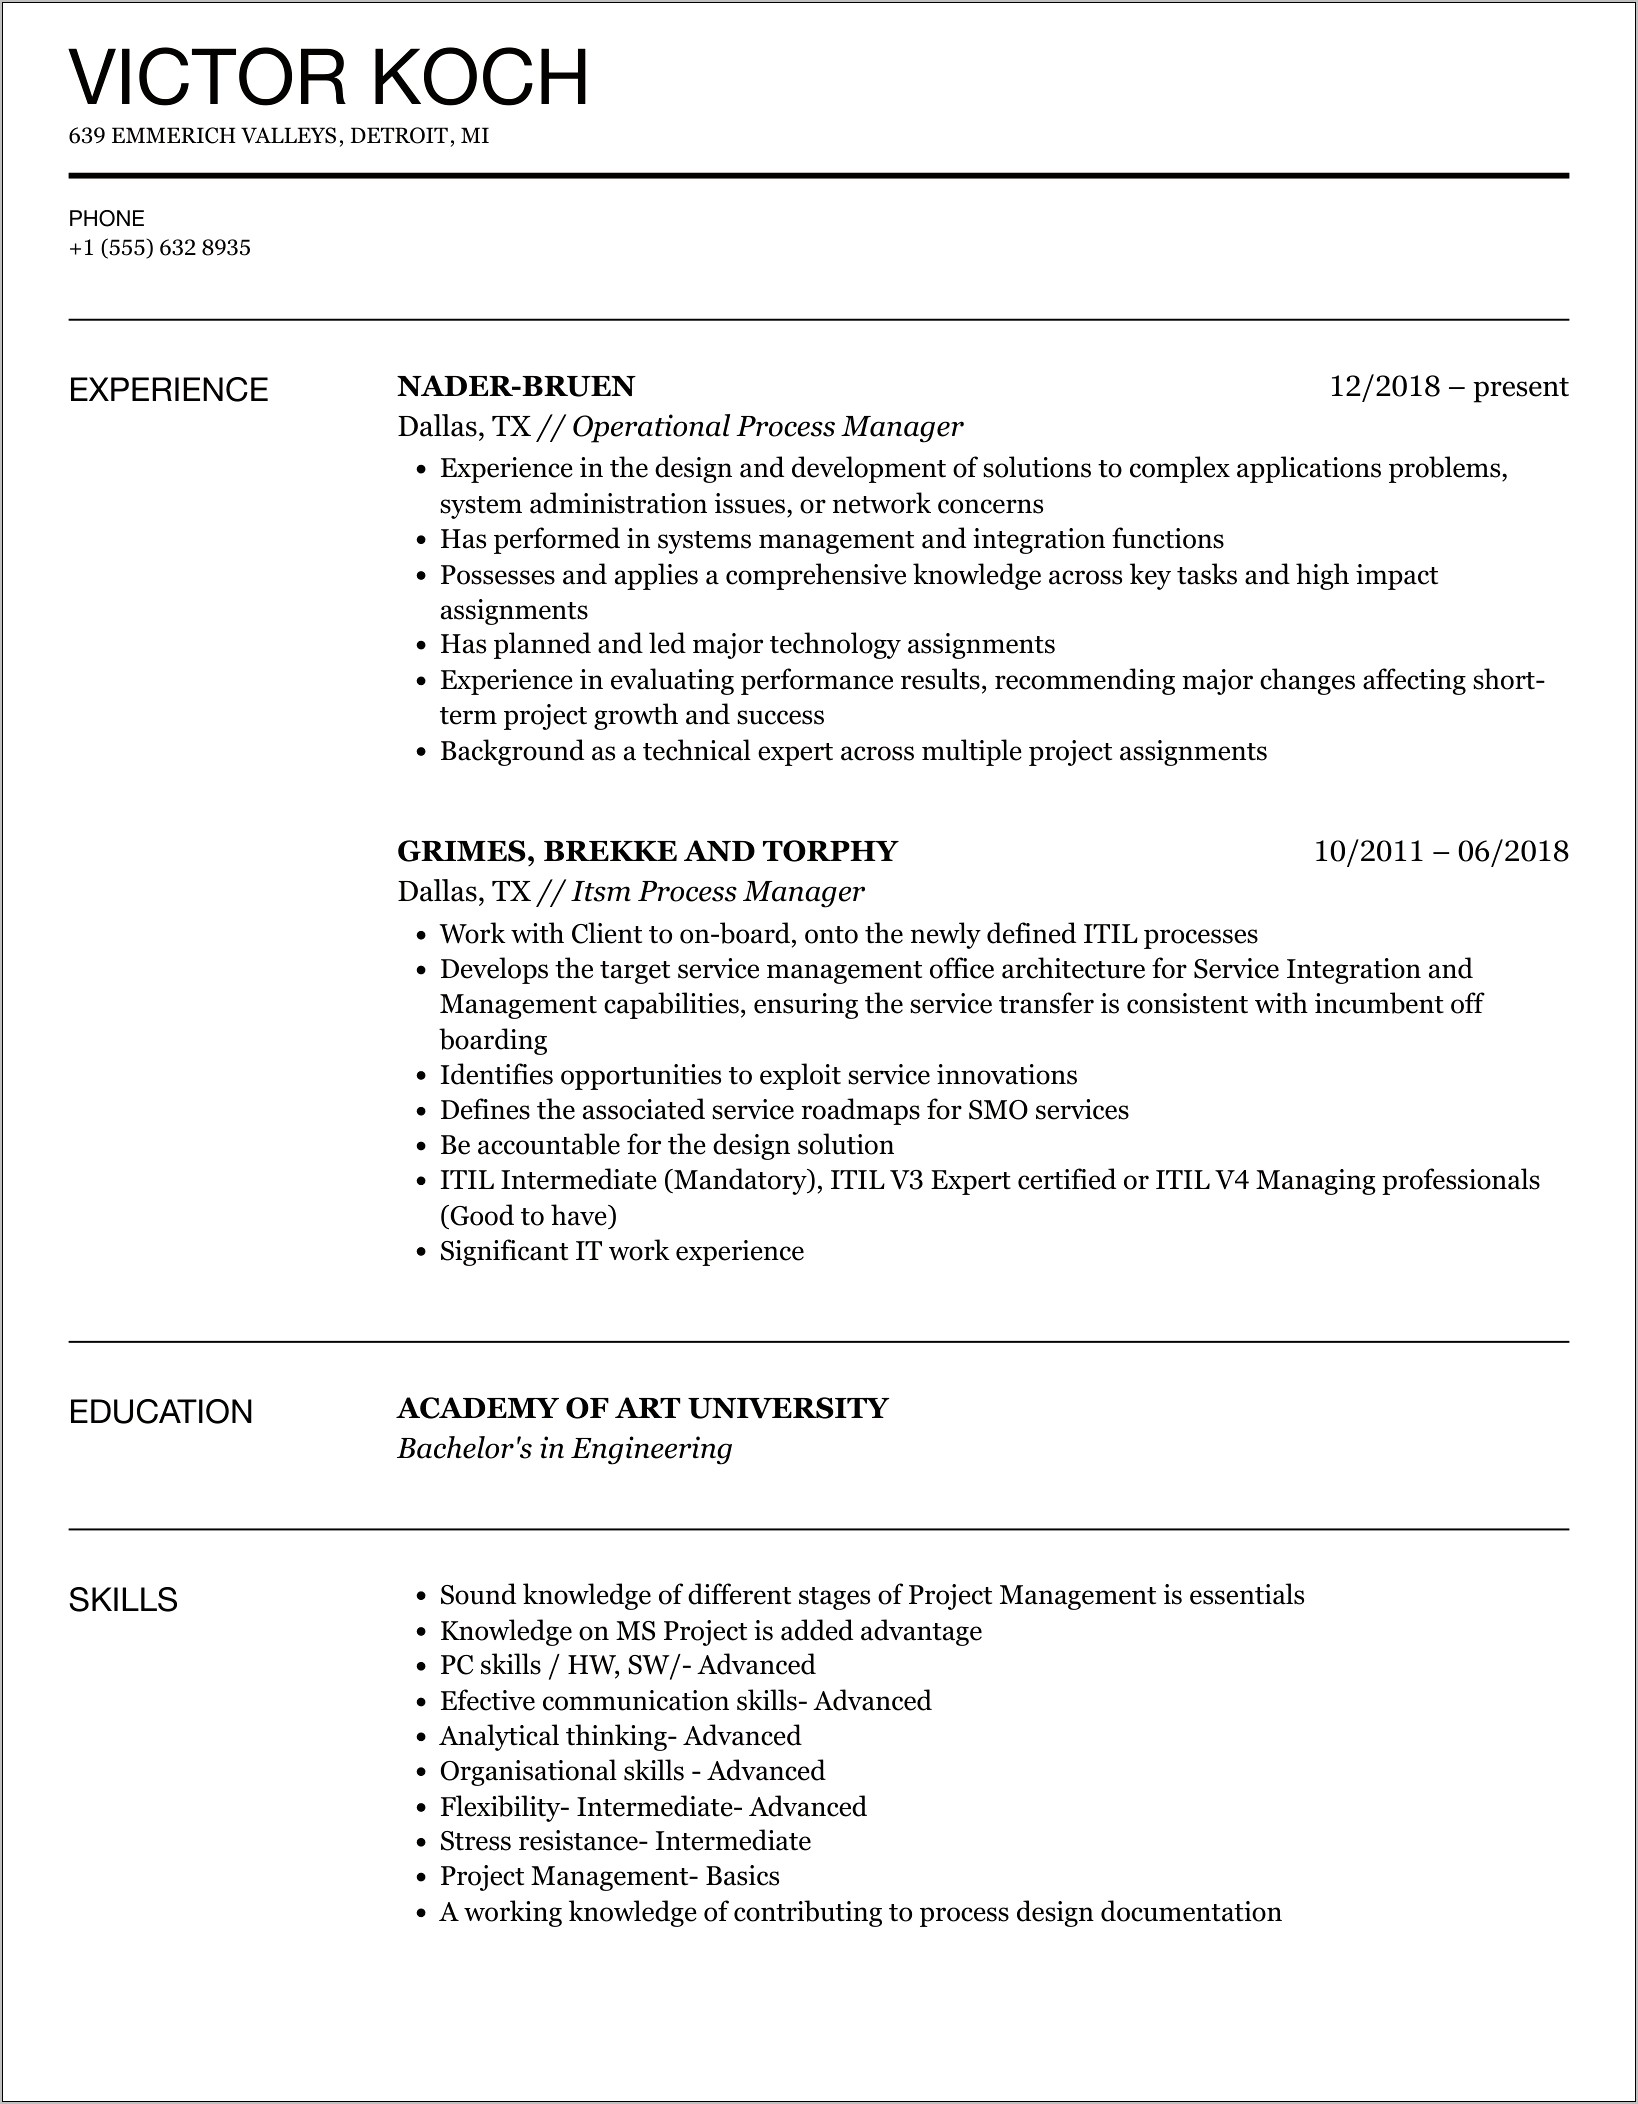 Resume Objective For Process Manager